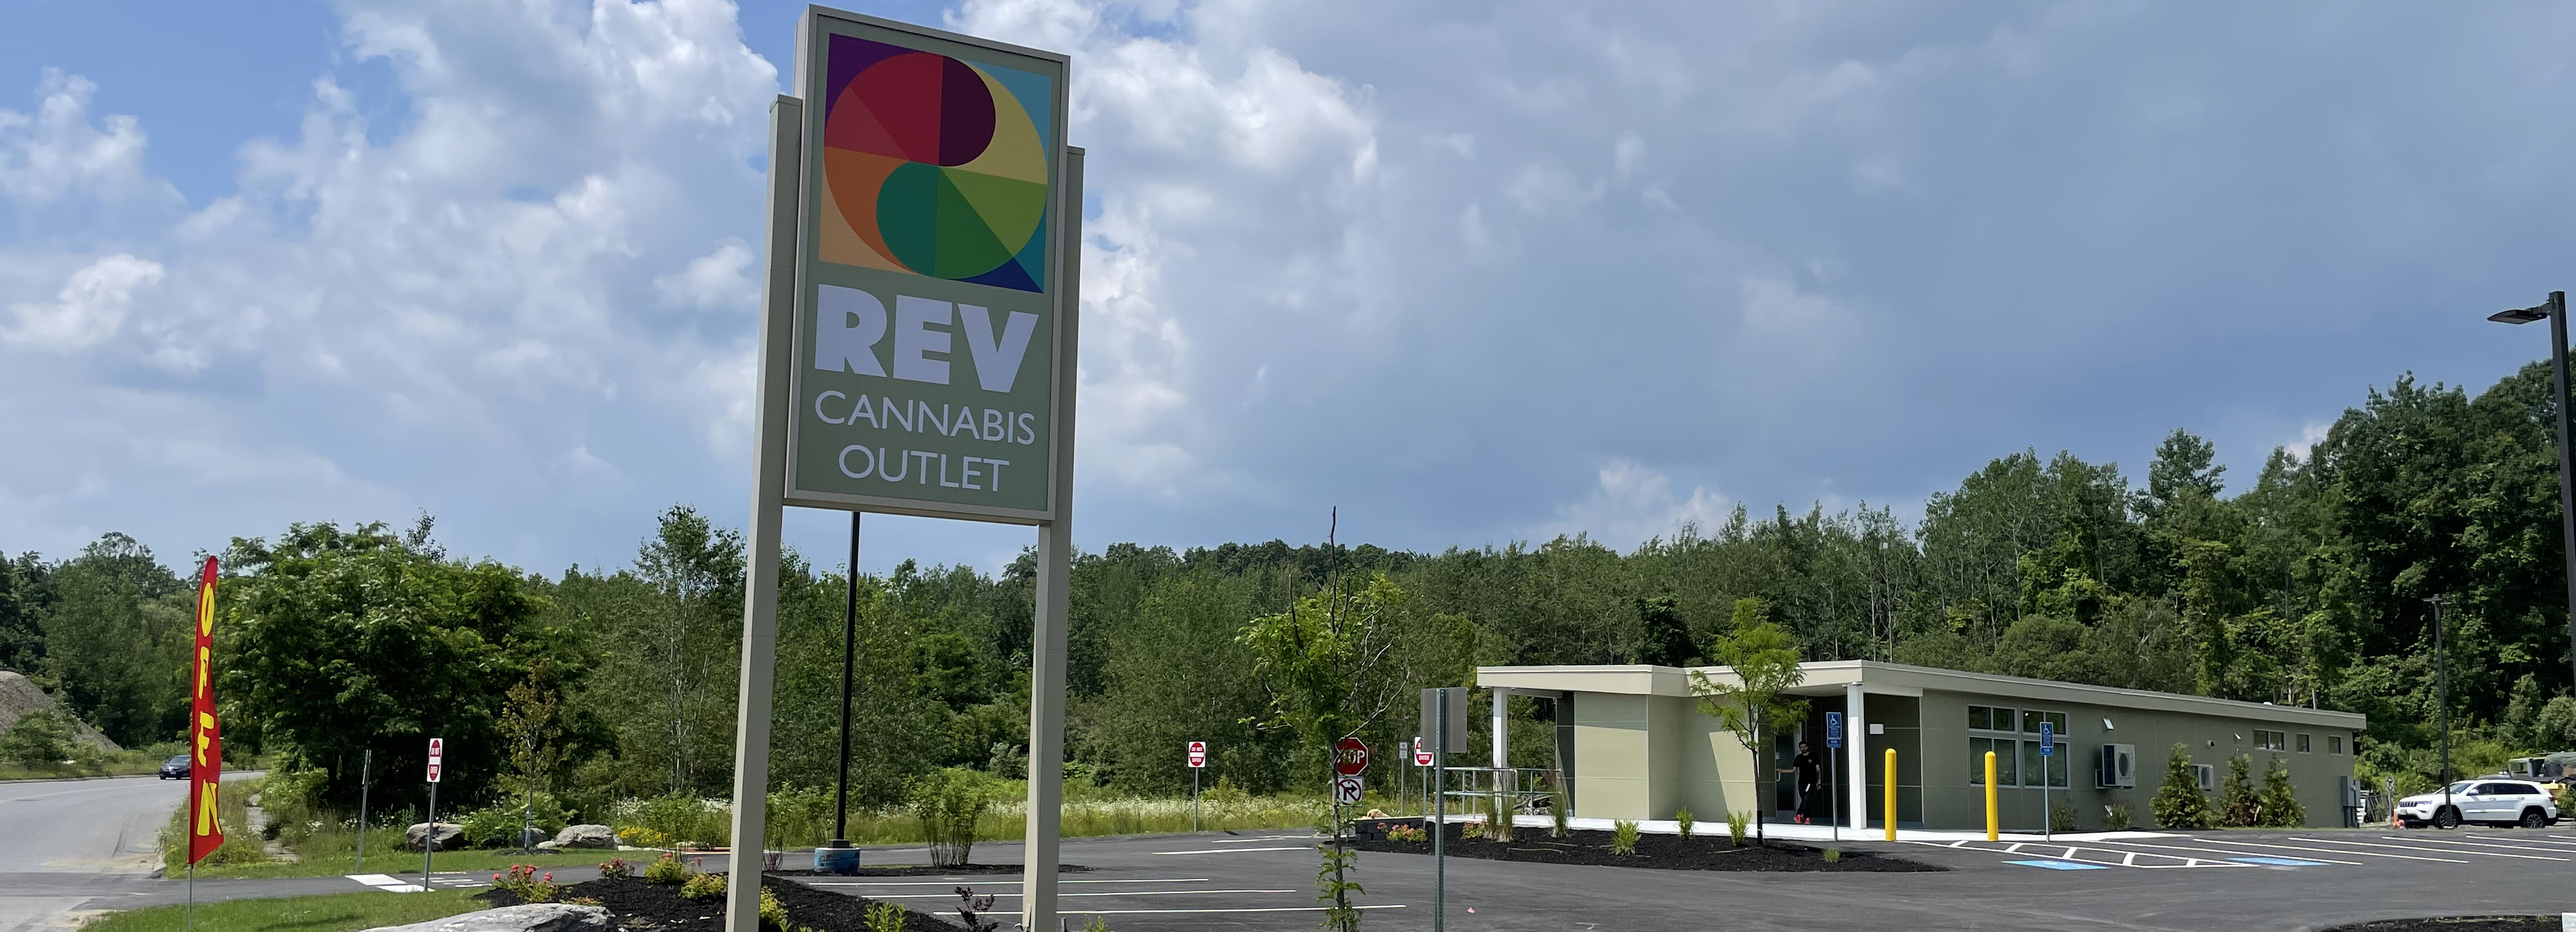 Rev Cannabis Outlet Leominster